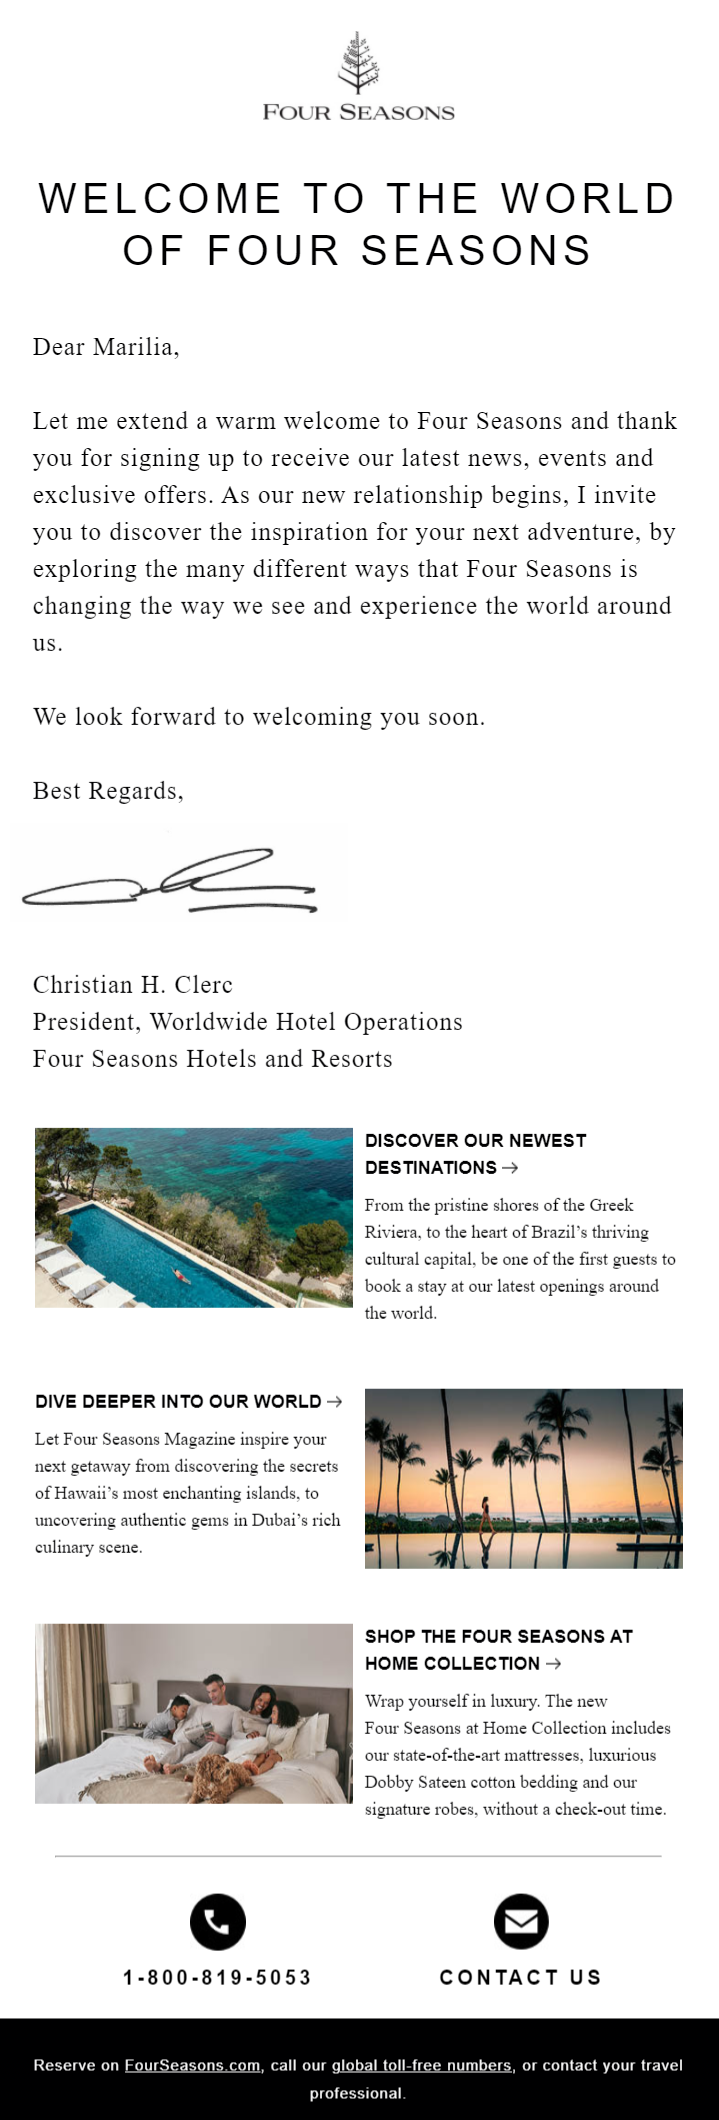 welcome sequence by four seasons